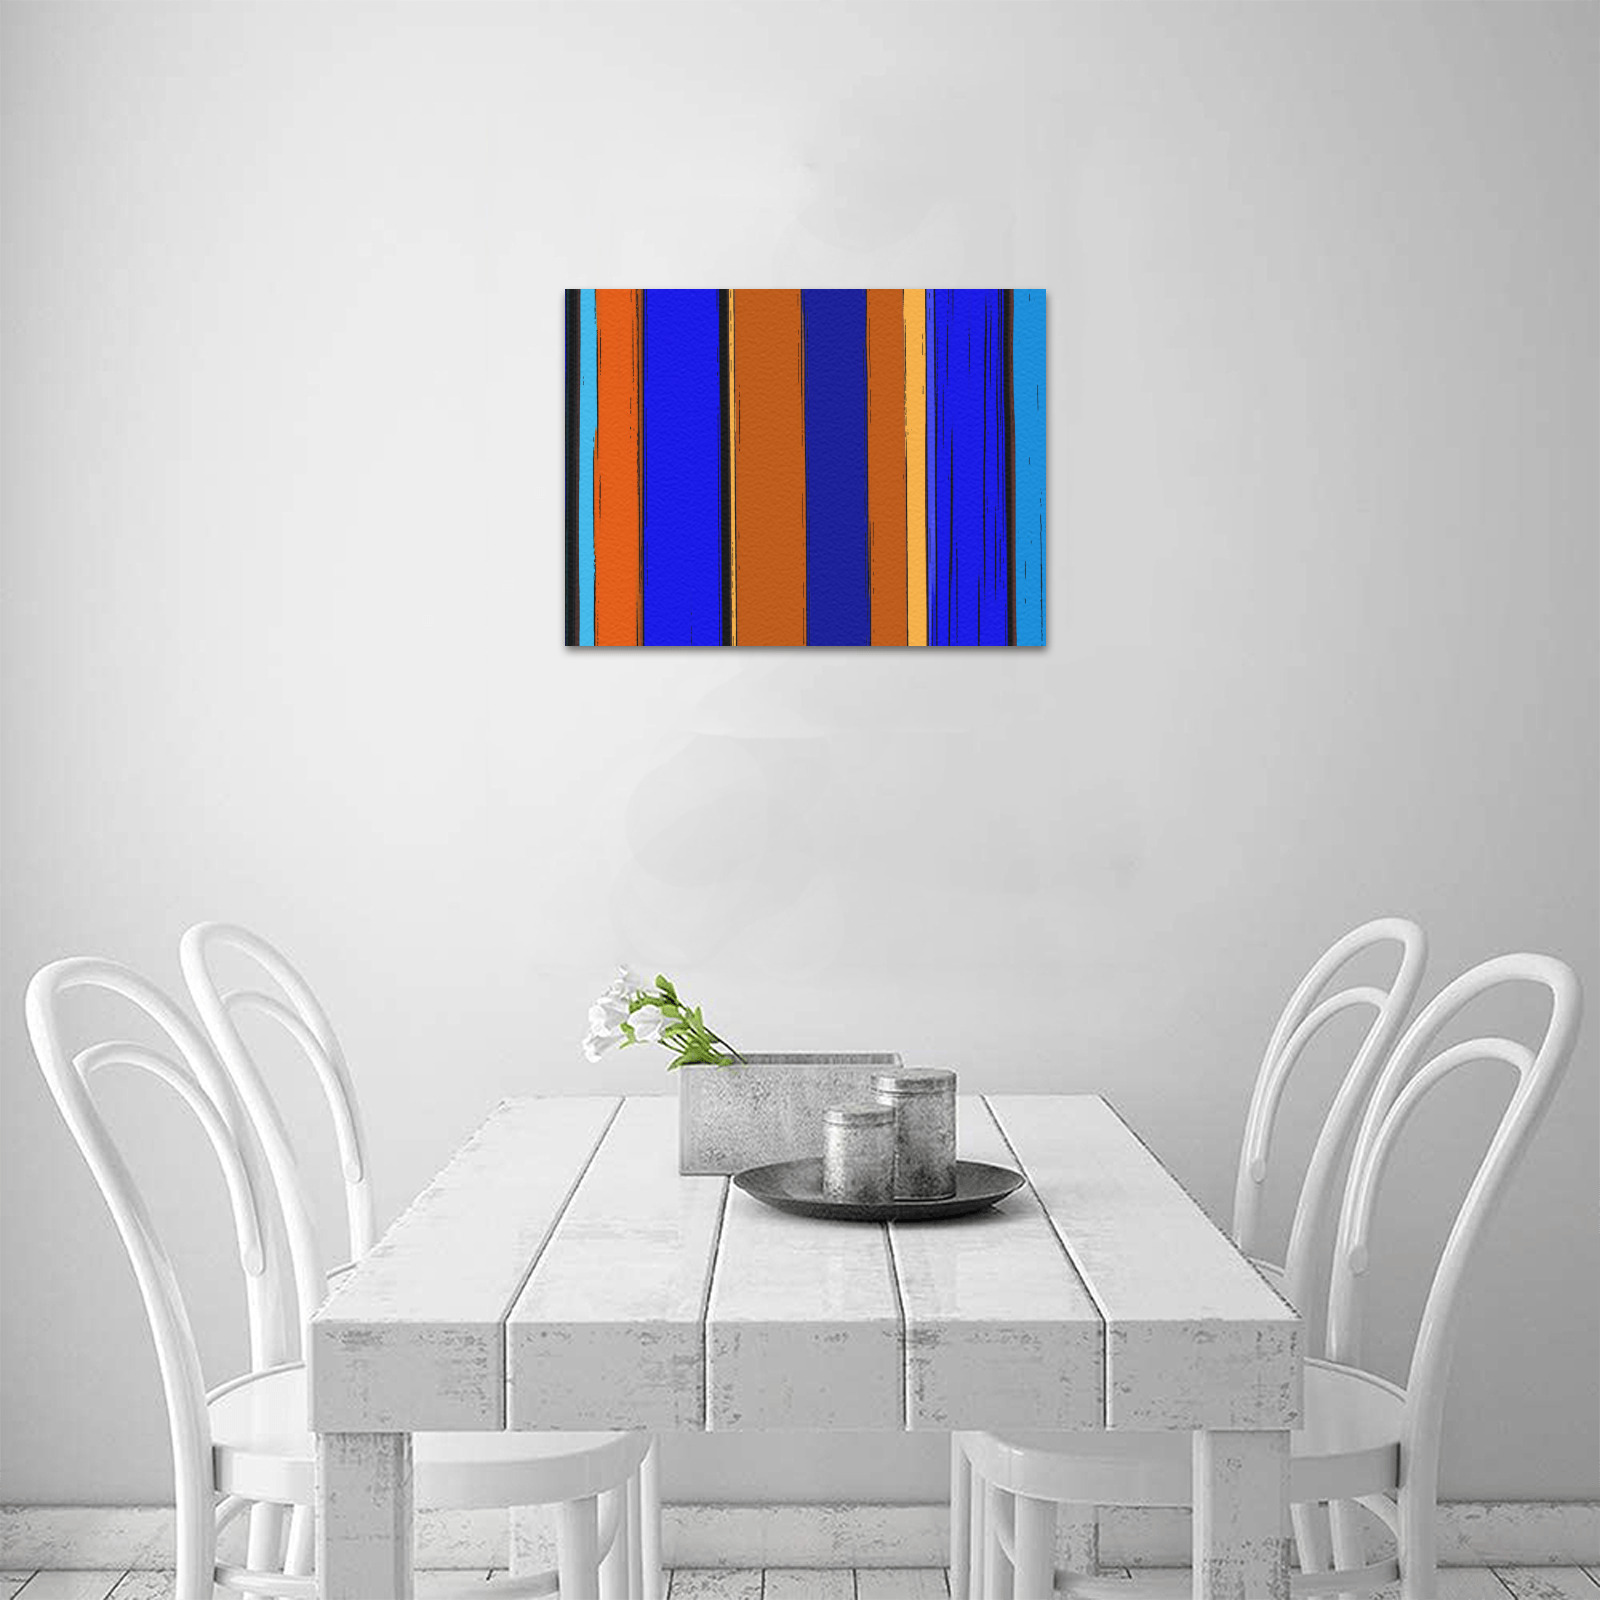 Abstract Blue And Orange 930 Upgraded Canvas Print 16"x12"